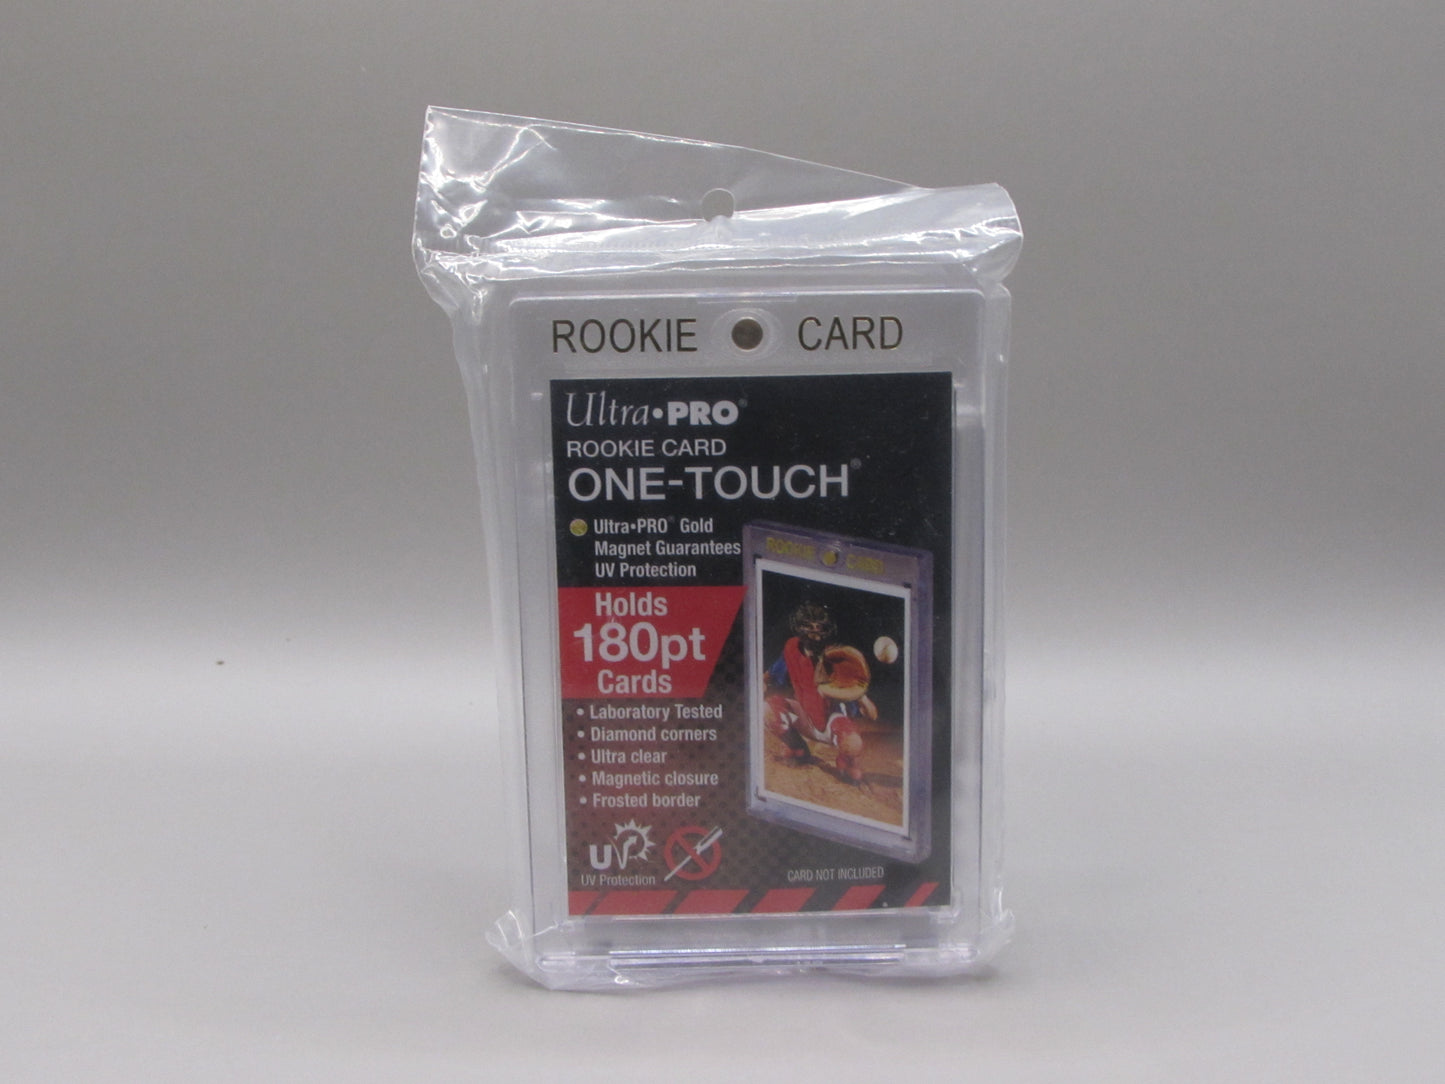 Ultra pro 180pt rookie card one-touch